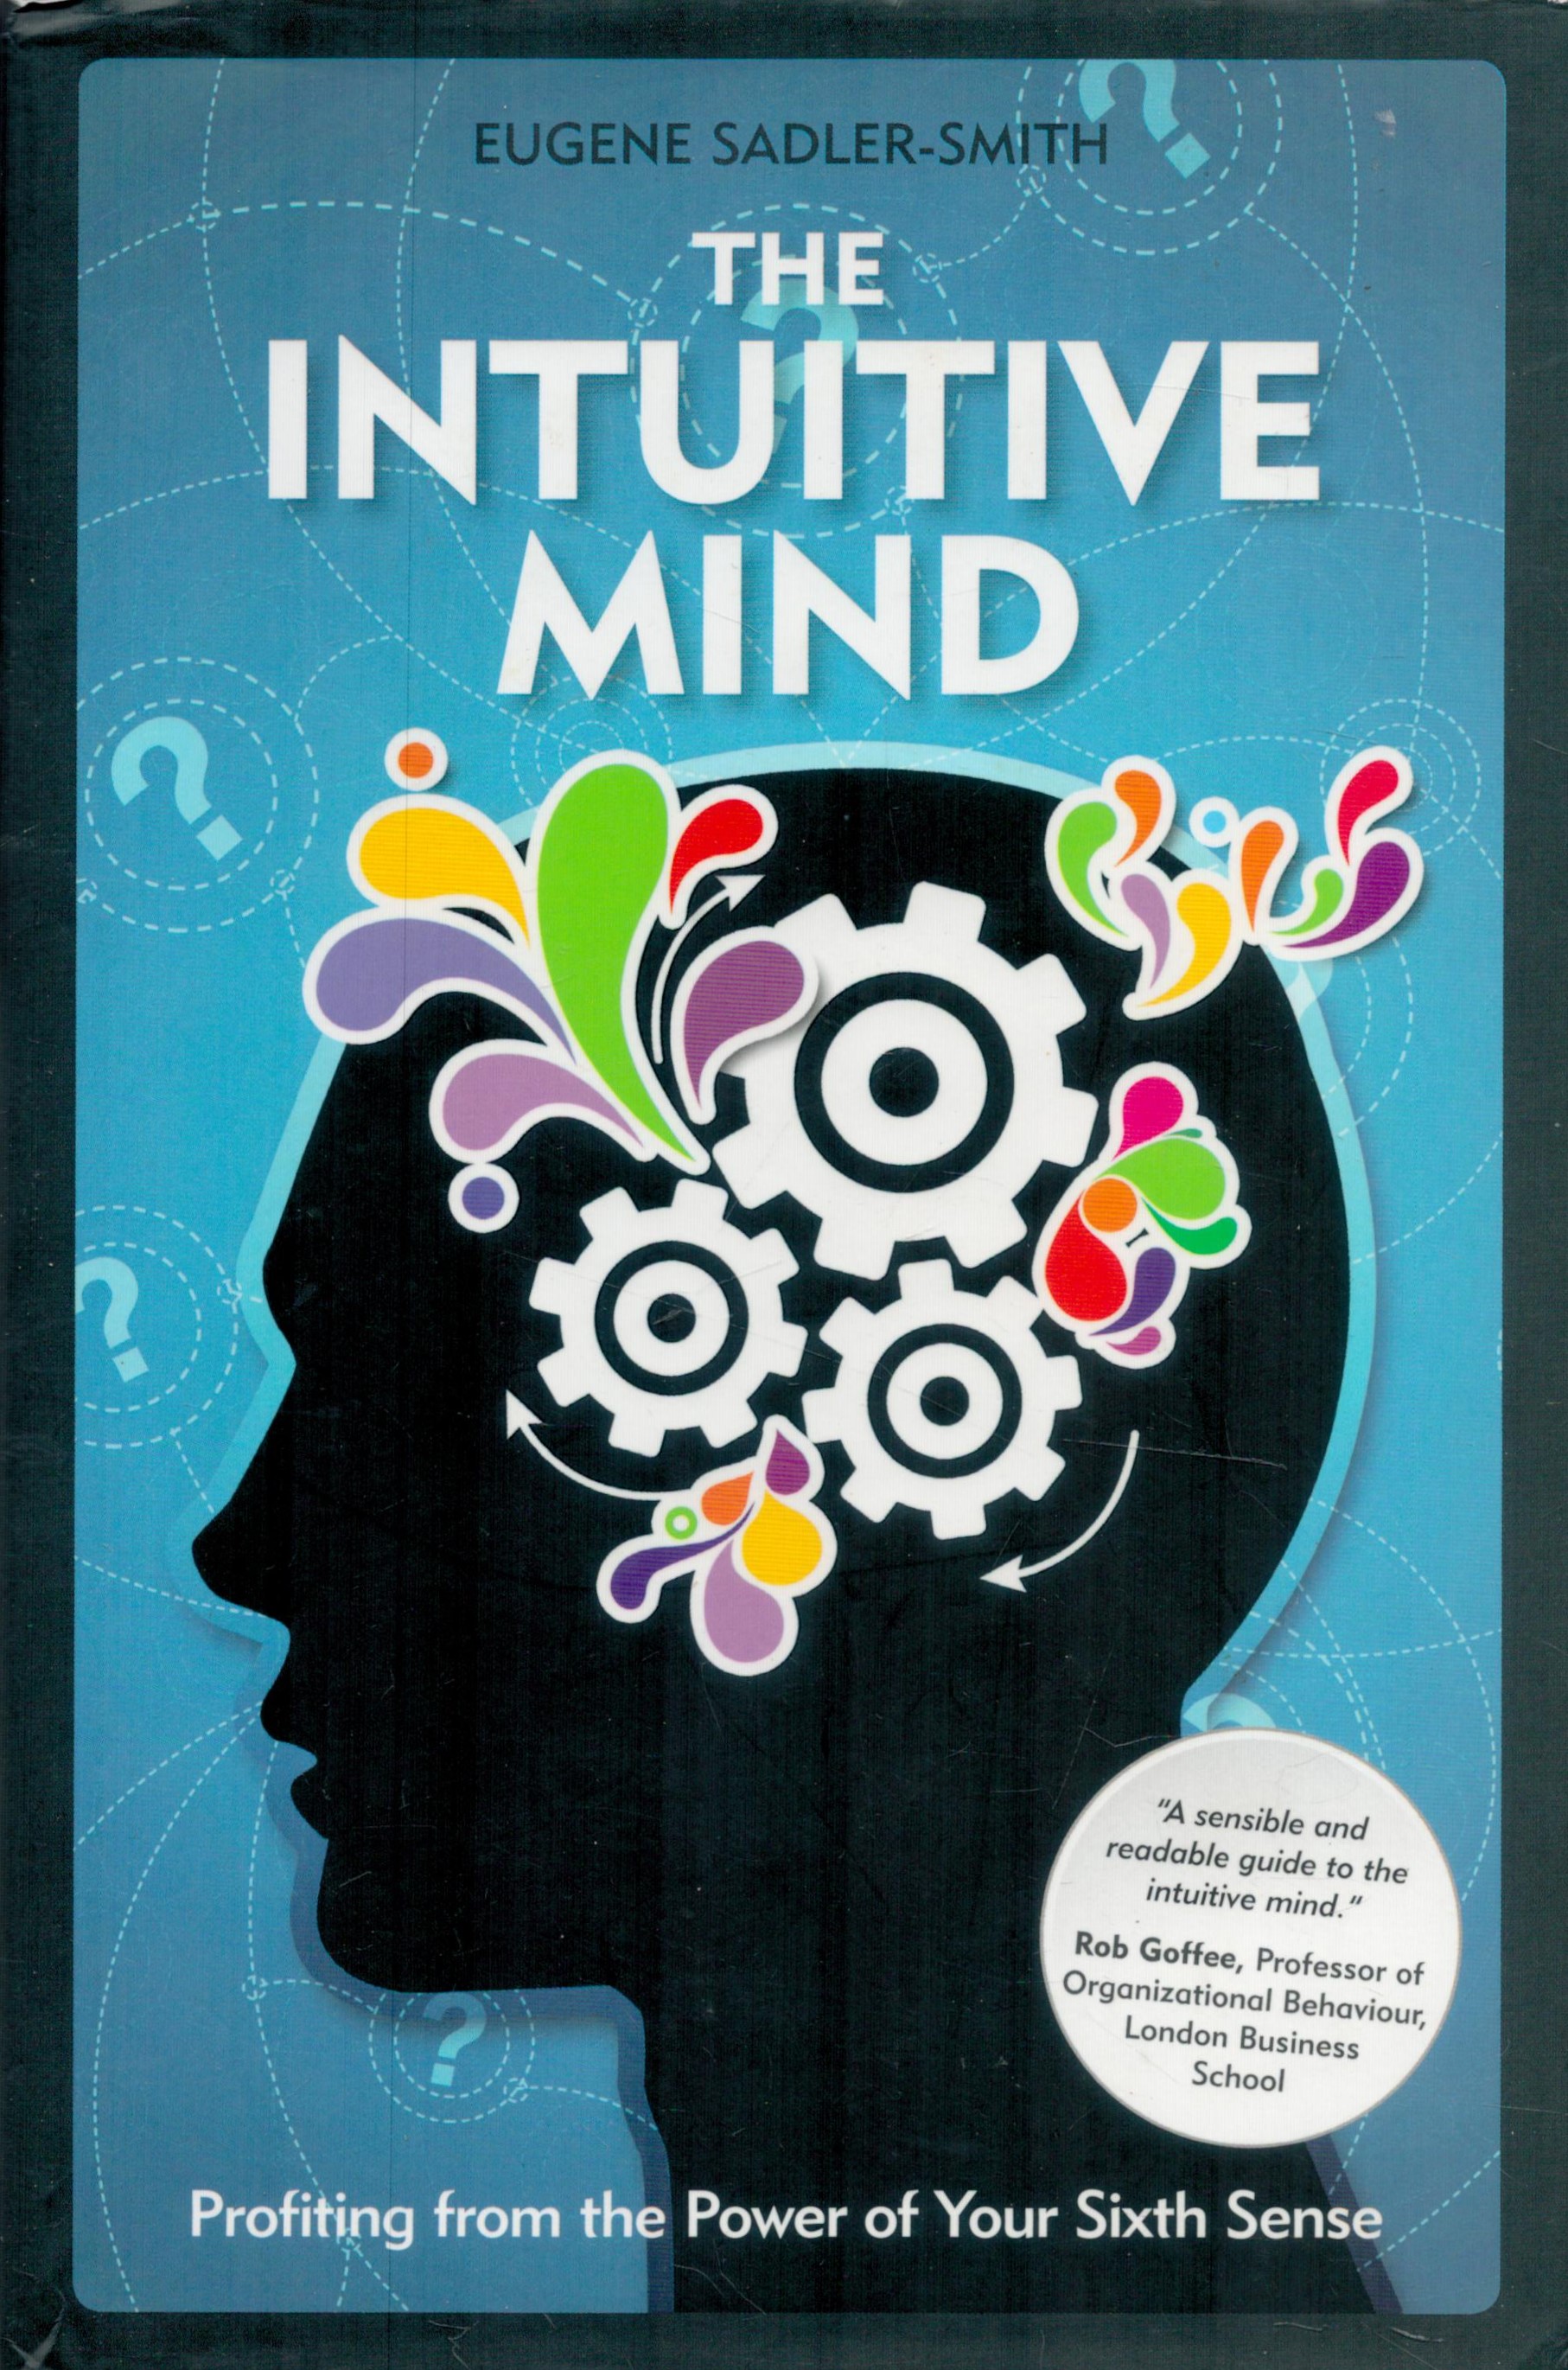 The Intuitive Mind - Profiting from the power of your sixth sense by Eugene Sadler-Smith 2010